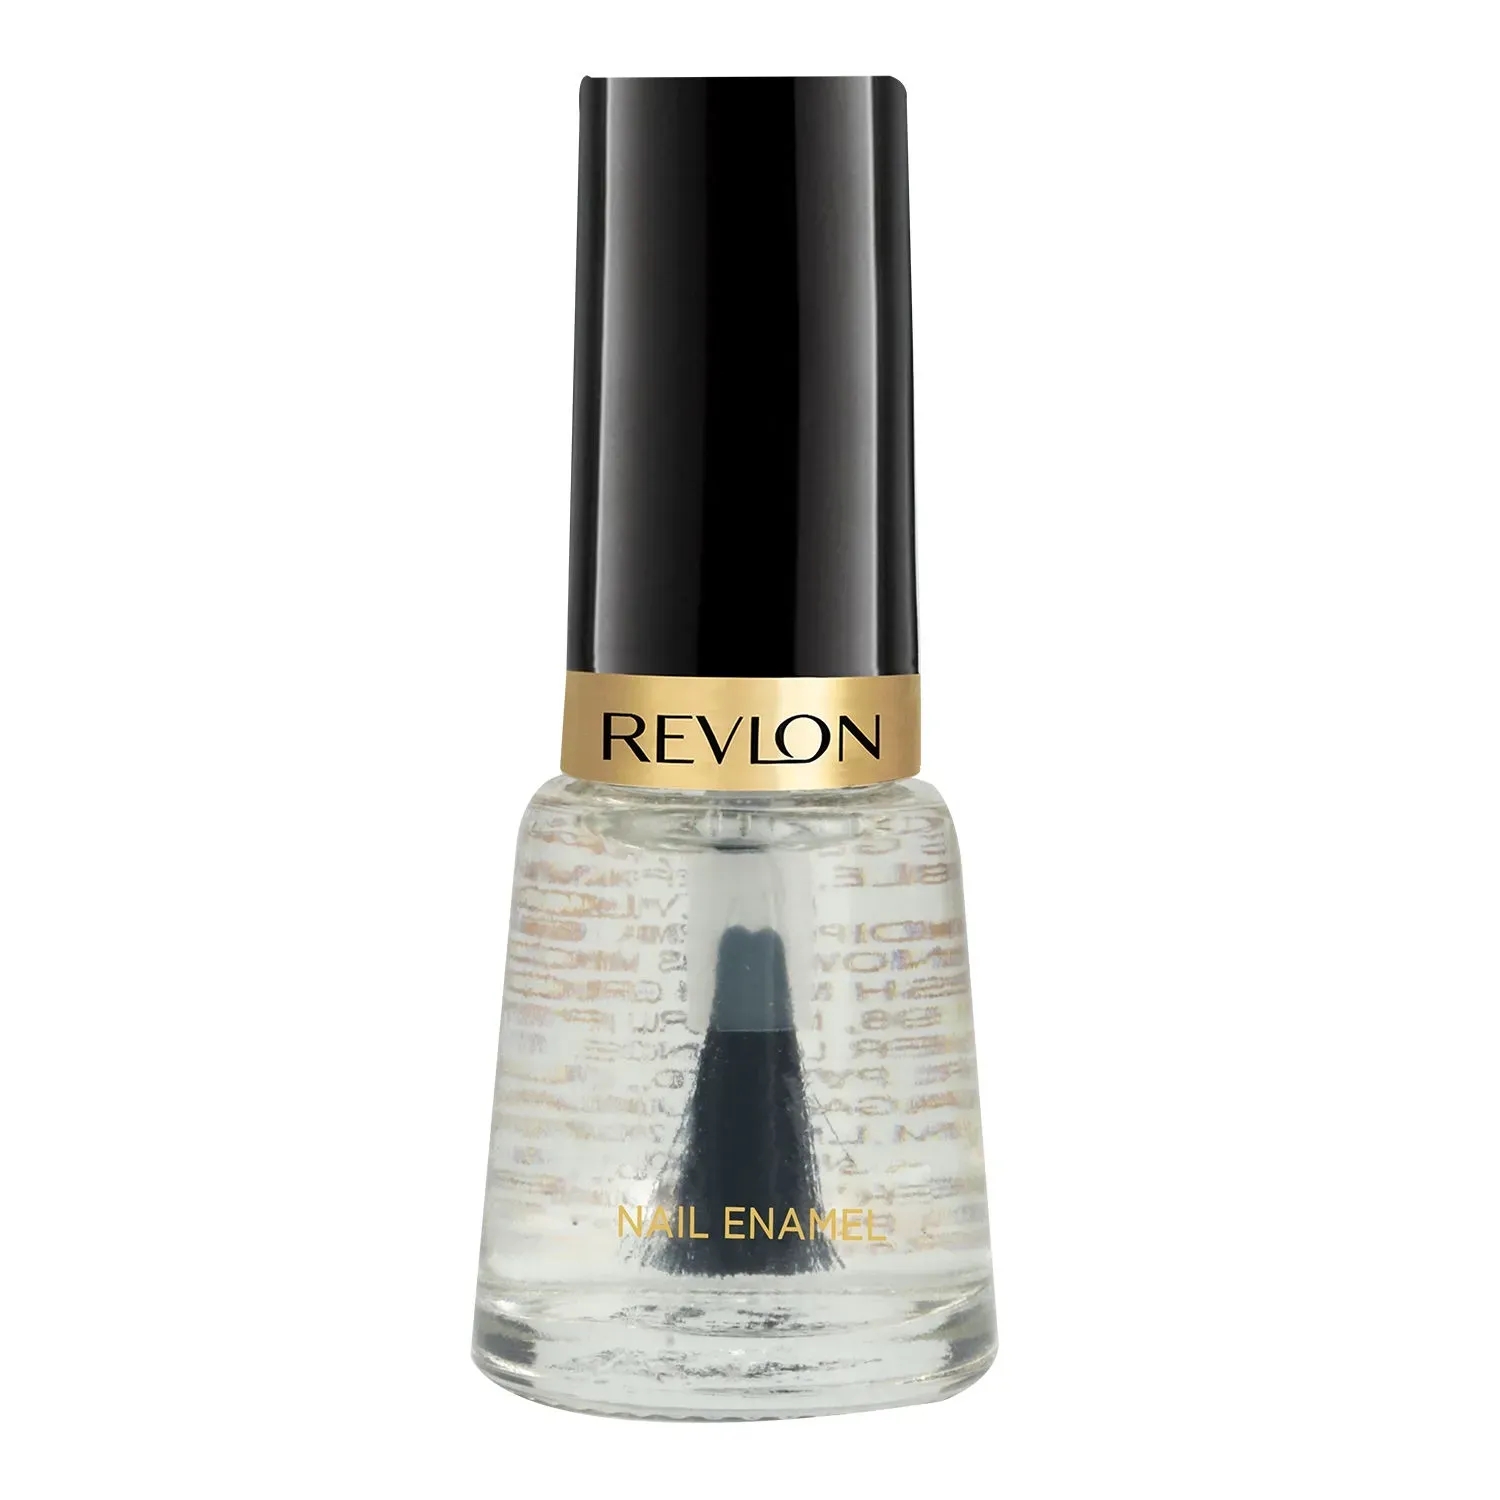 Buy Revlon Nail Enamel, Iced Mauve, 8ml and Revlon Nail Enamel, Pure Pearl,  8ml Online at Low Prices in India - Amazon.in